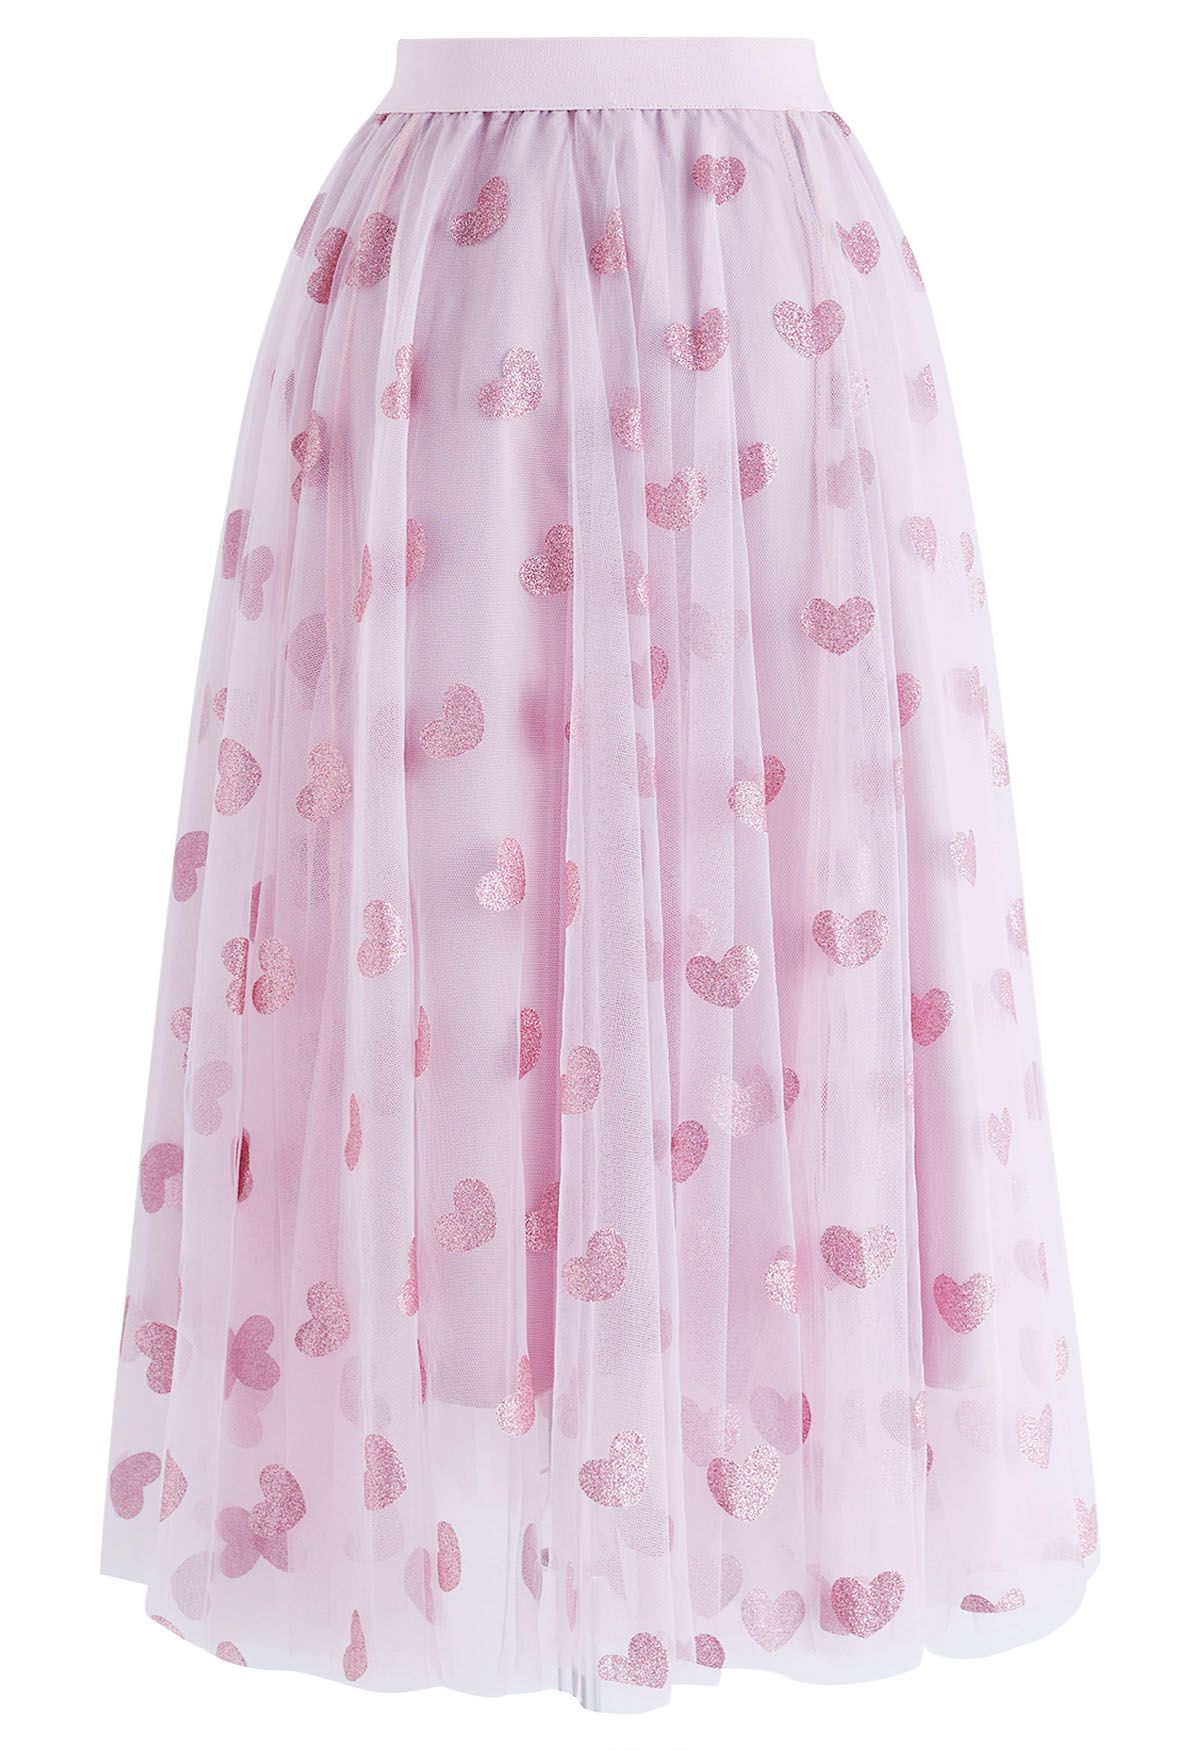 Shimmering Hearts Mesh Tulle Midi Skirt in Pink - Retro, Indie and ...